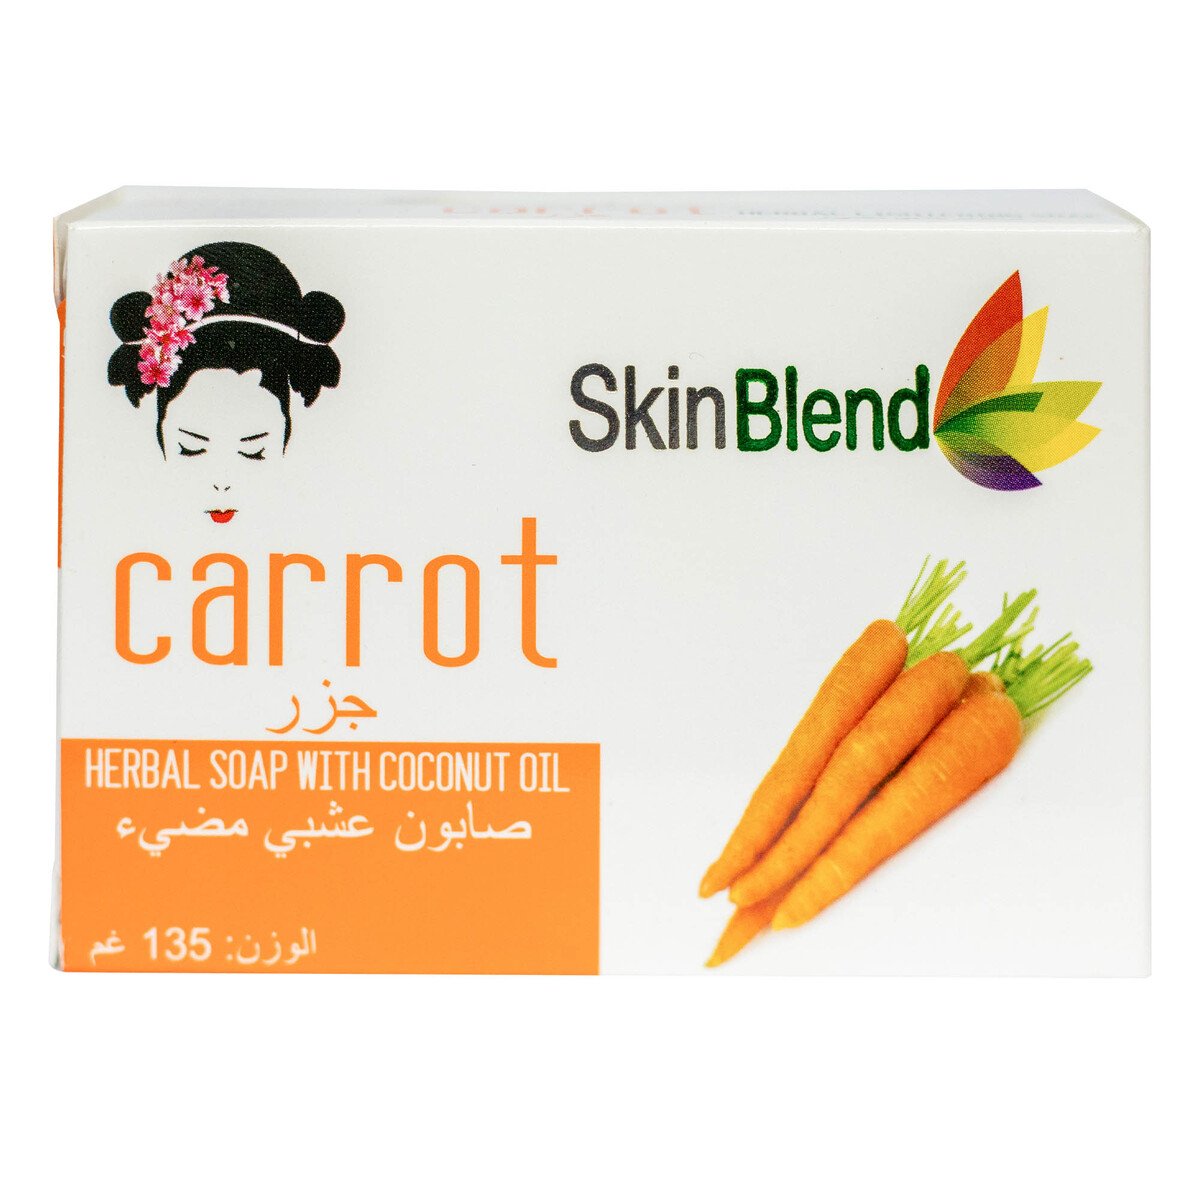 Skin Blend Carrot Herbal Soap with Coconut Oil 135 g